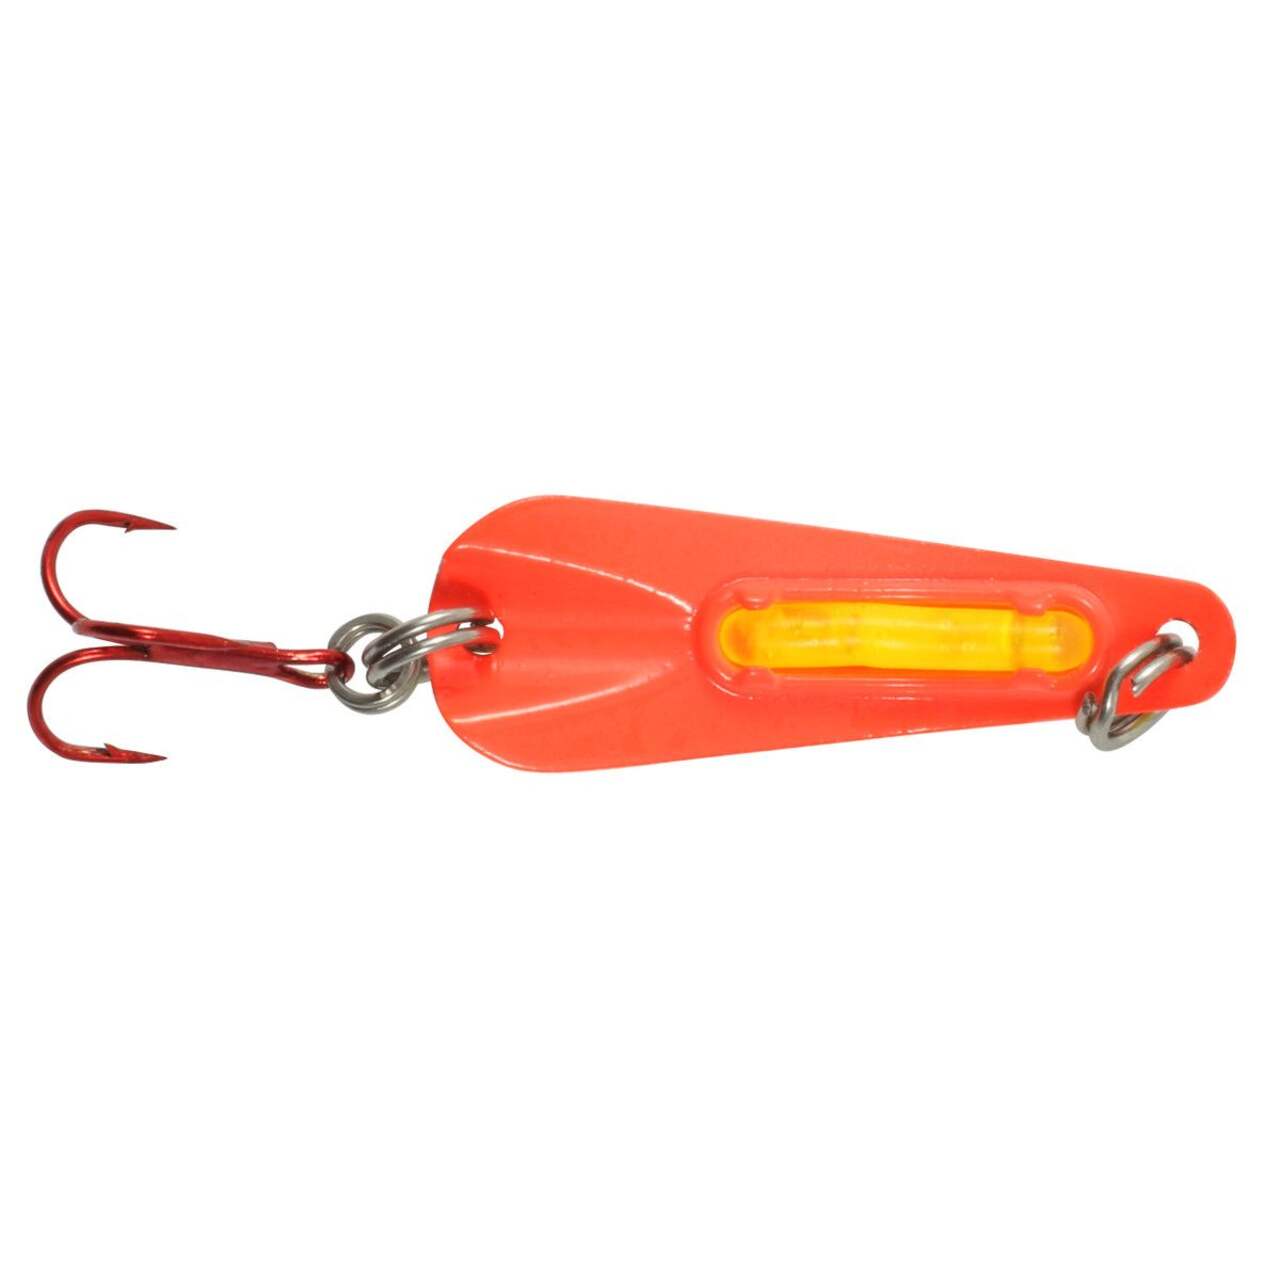 Williams Ice Fishing Whistler Spoon Lure, Silver Shiner